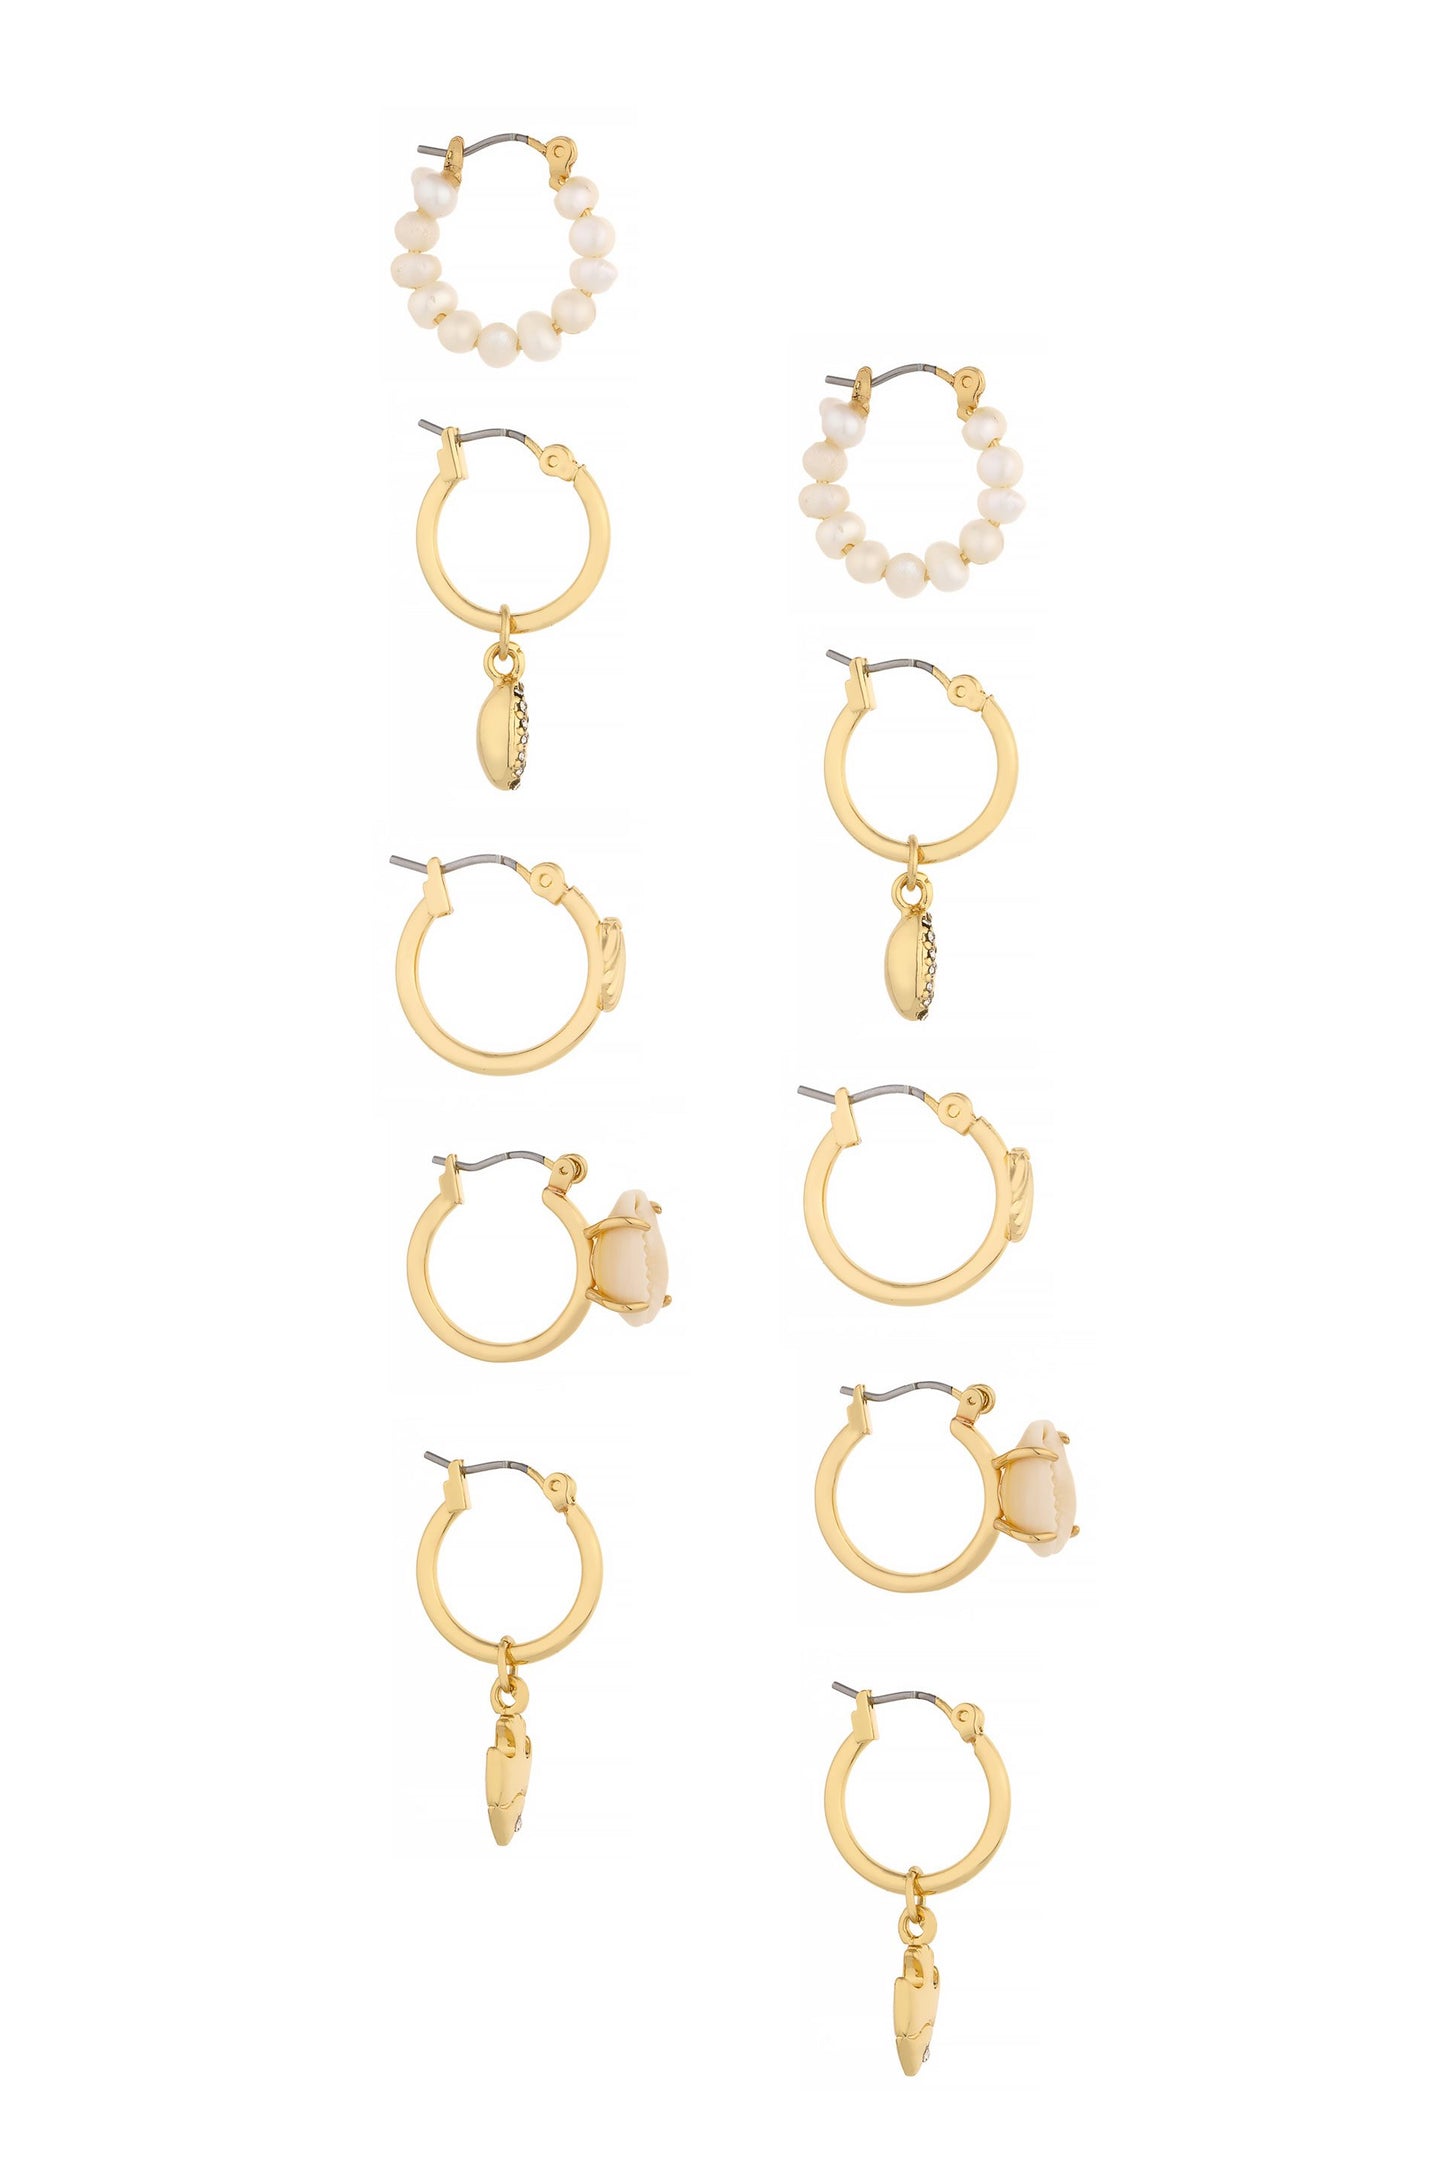 Sun Searcher 18k Gold Plated Mini Hoop Set of 5 on white